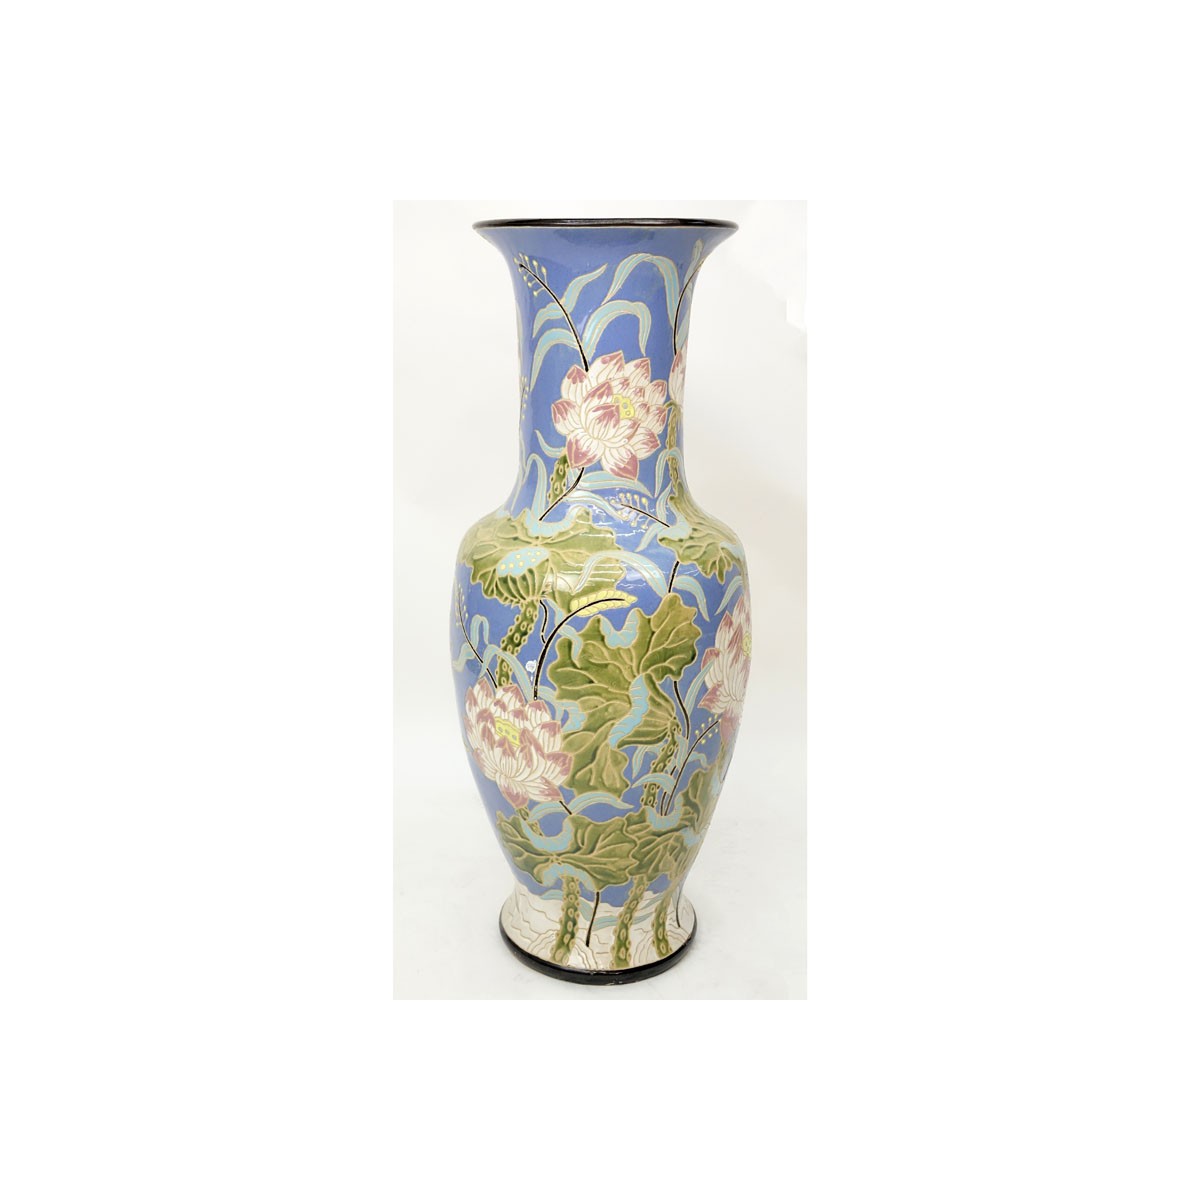 Monumental Majolica Pottery Vase. Features Asian i - Image 2 of 7